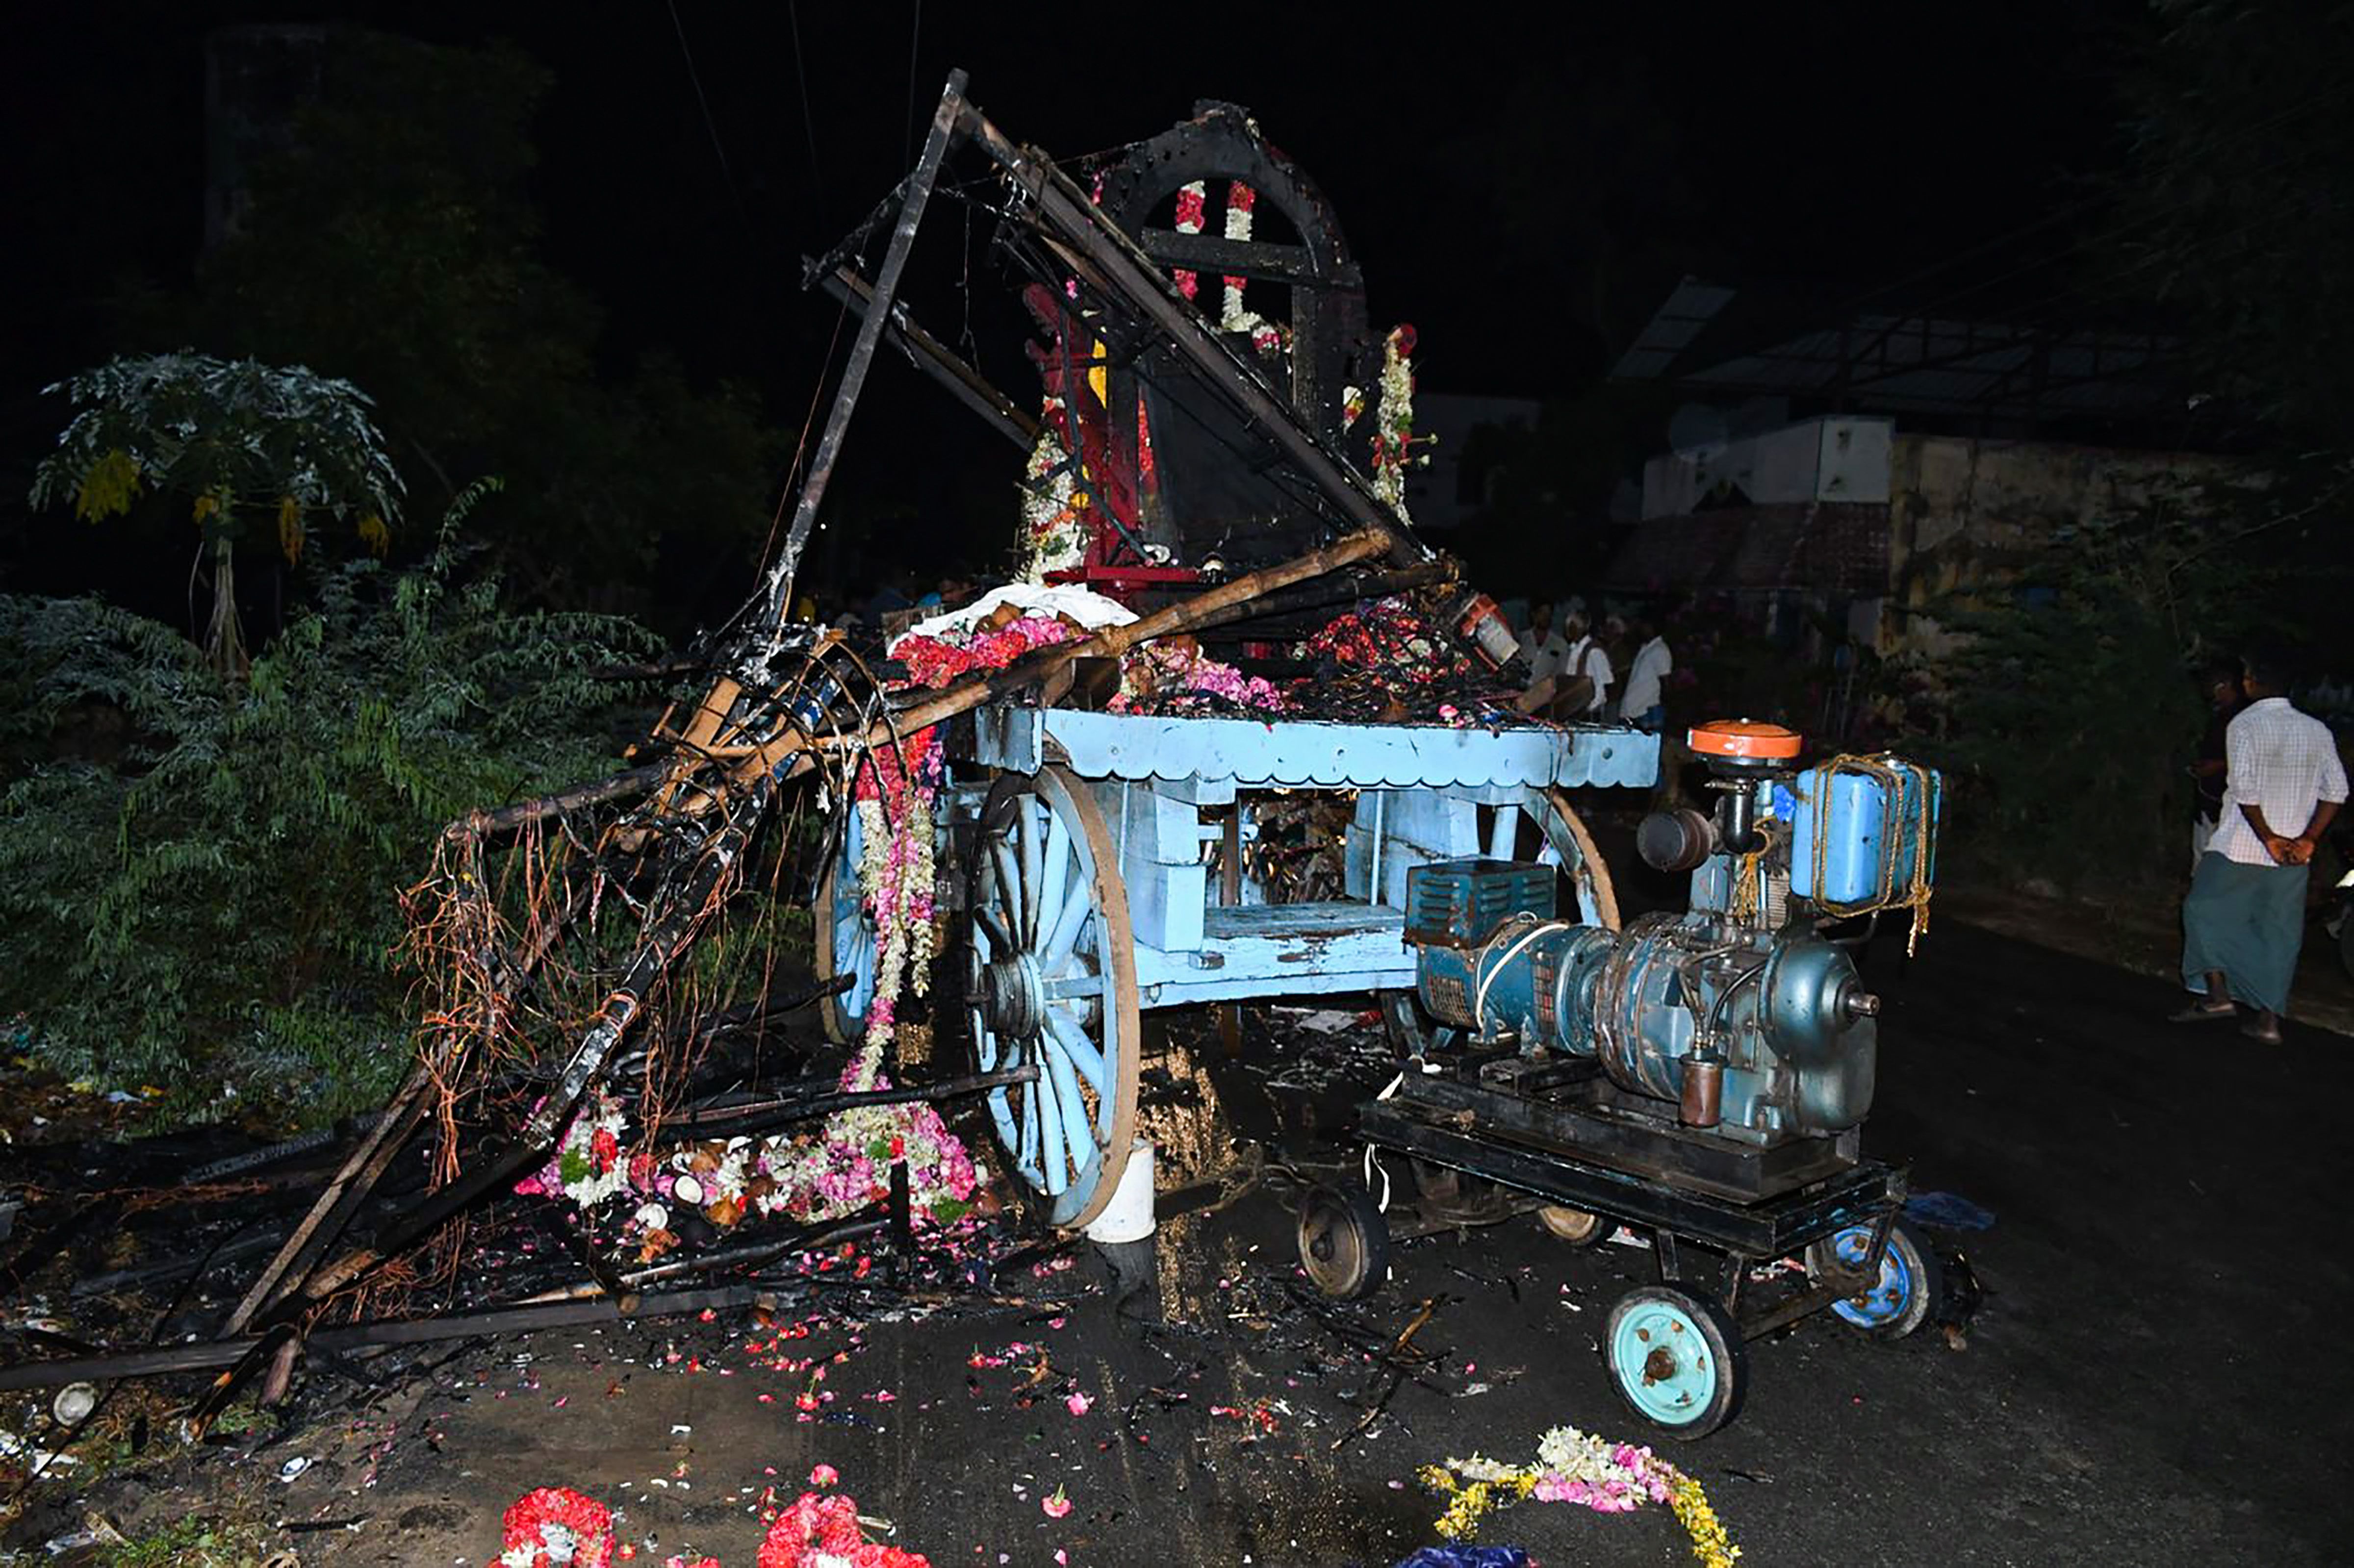 Mangled remains of the chariot after several people were electrocuted during a chariot procession, in Kalimedu area of Thanjavur district, Wednesday, April 27, 2022. (PTI photo)